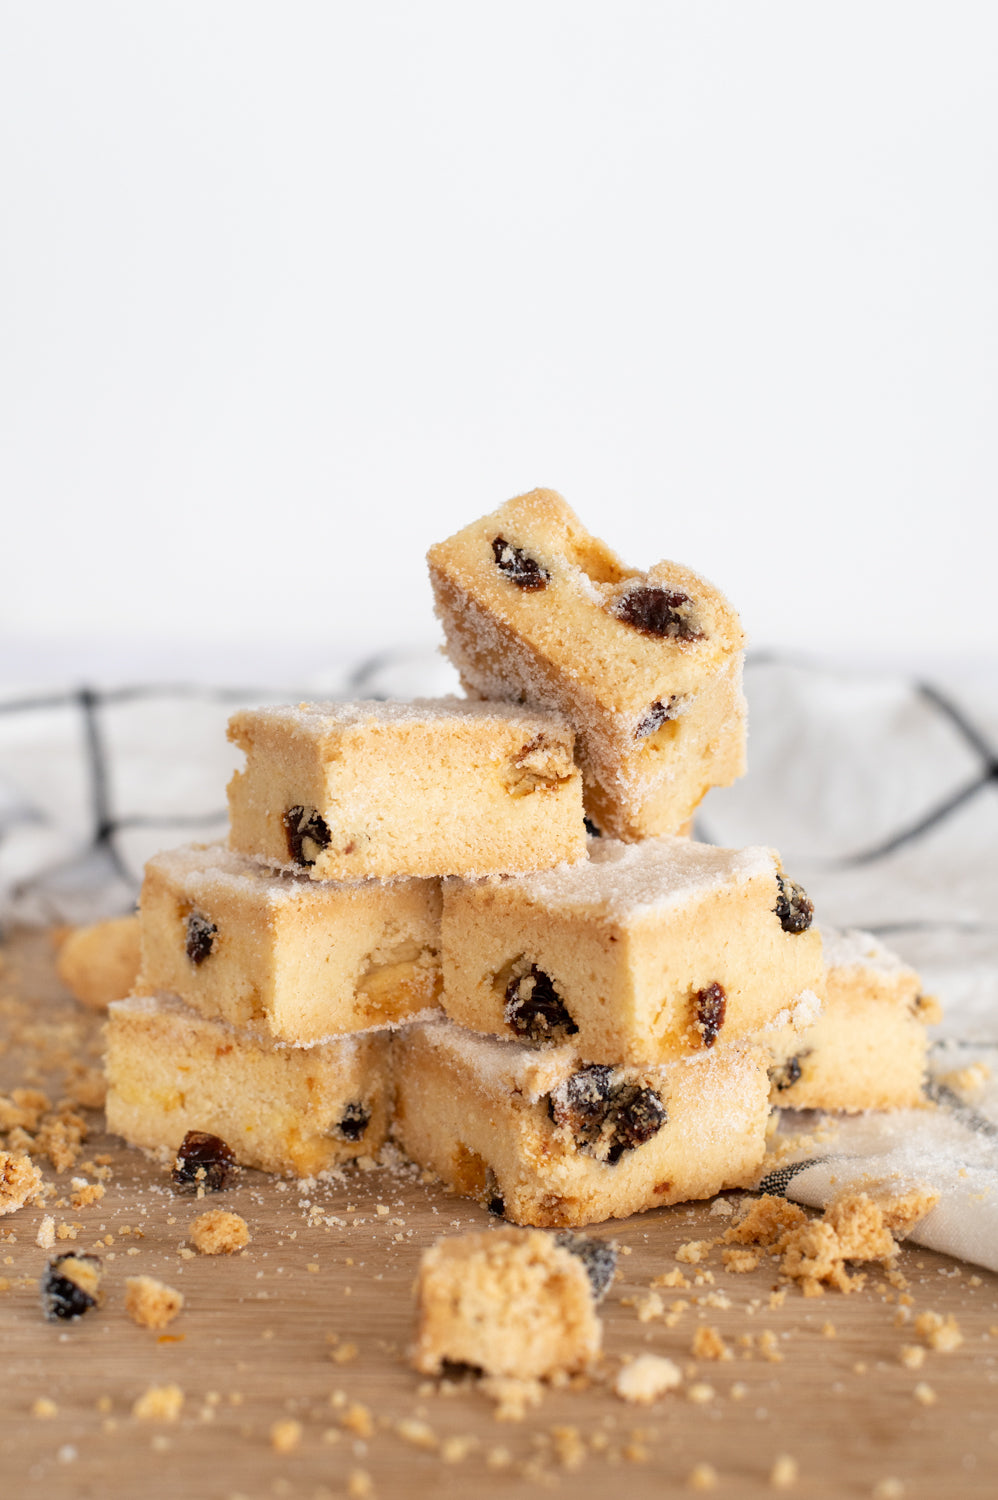 A pile of raisin shortbread biscuits